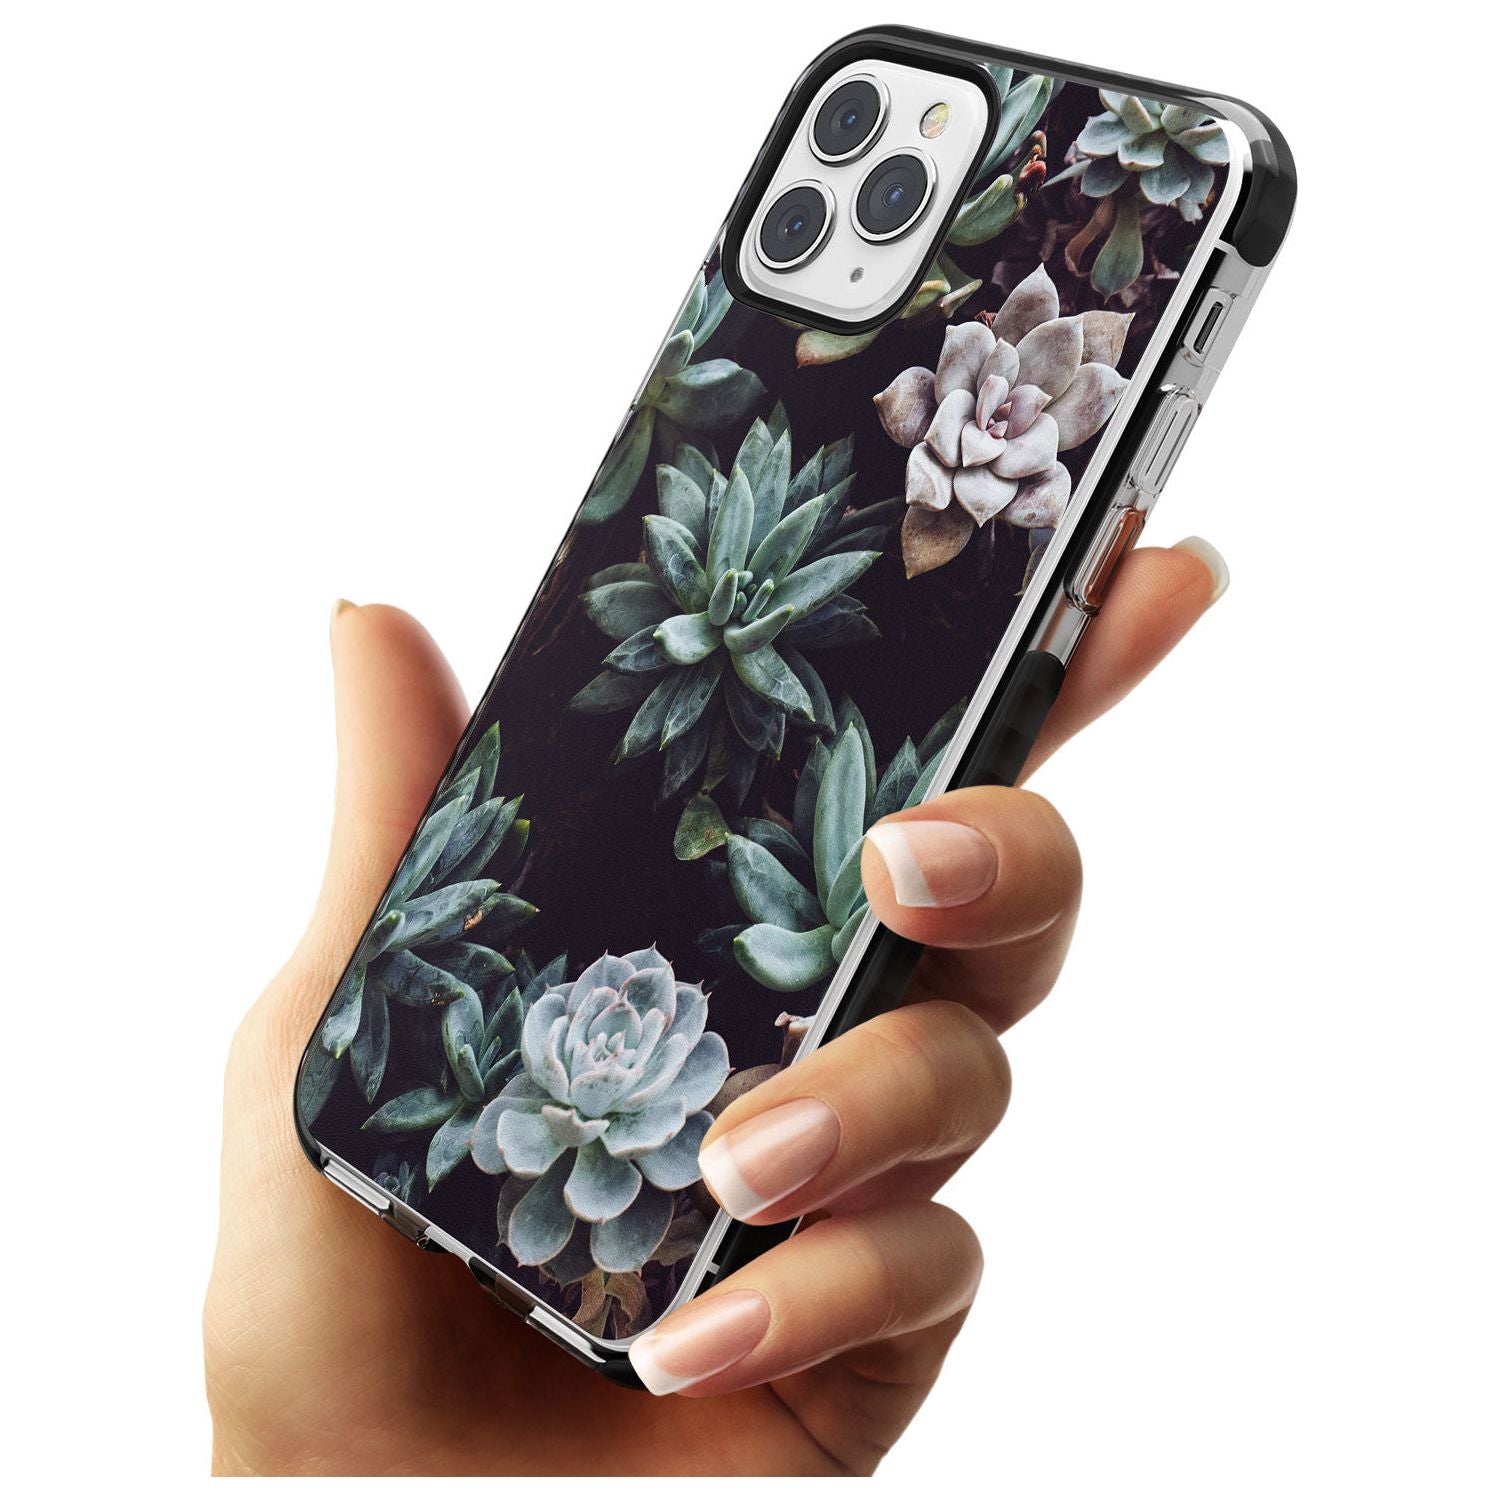 Mixed Succulents - Real Botanical Photographs Black Impact Phone Case for iPhone 11 Pro Max